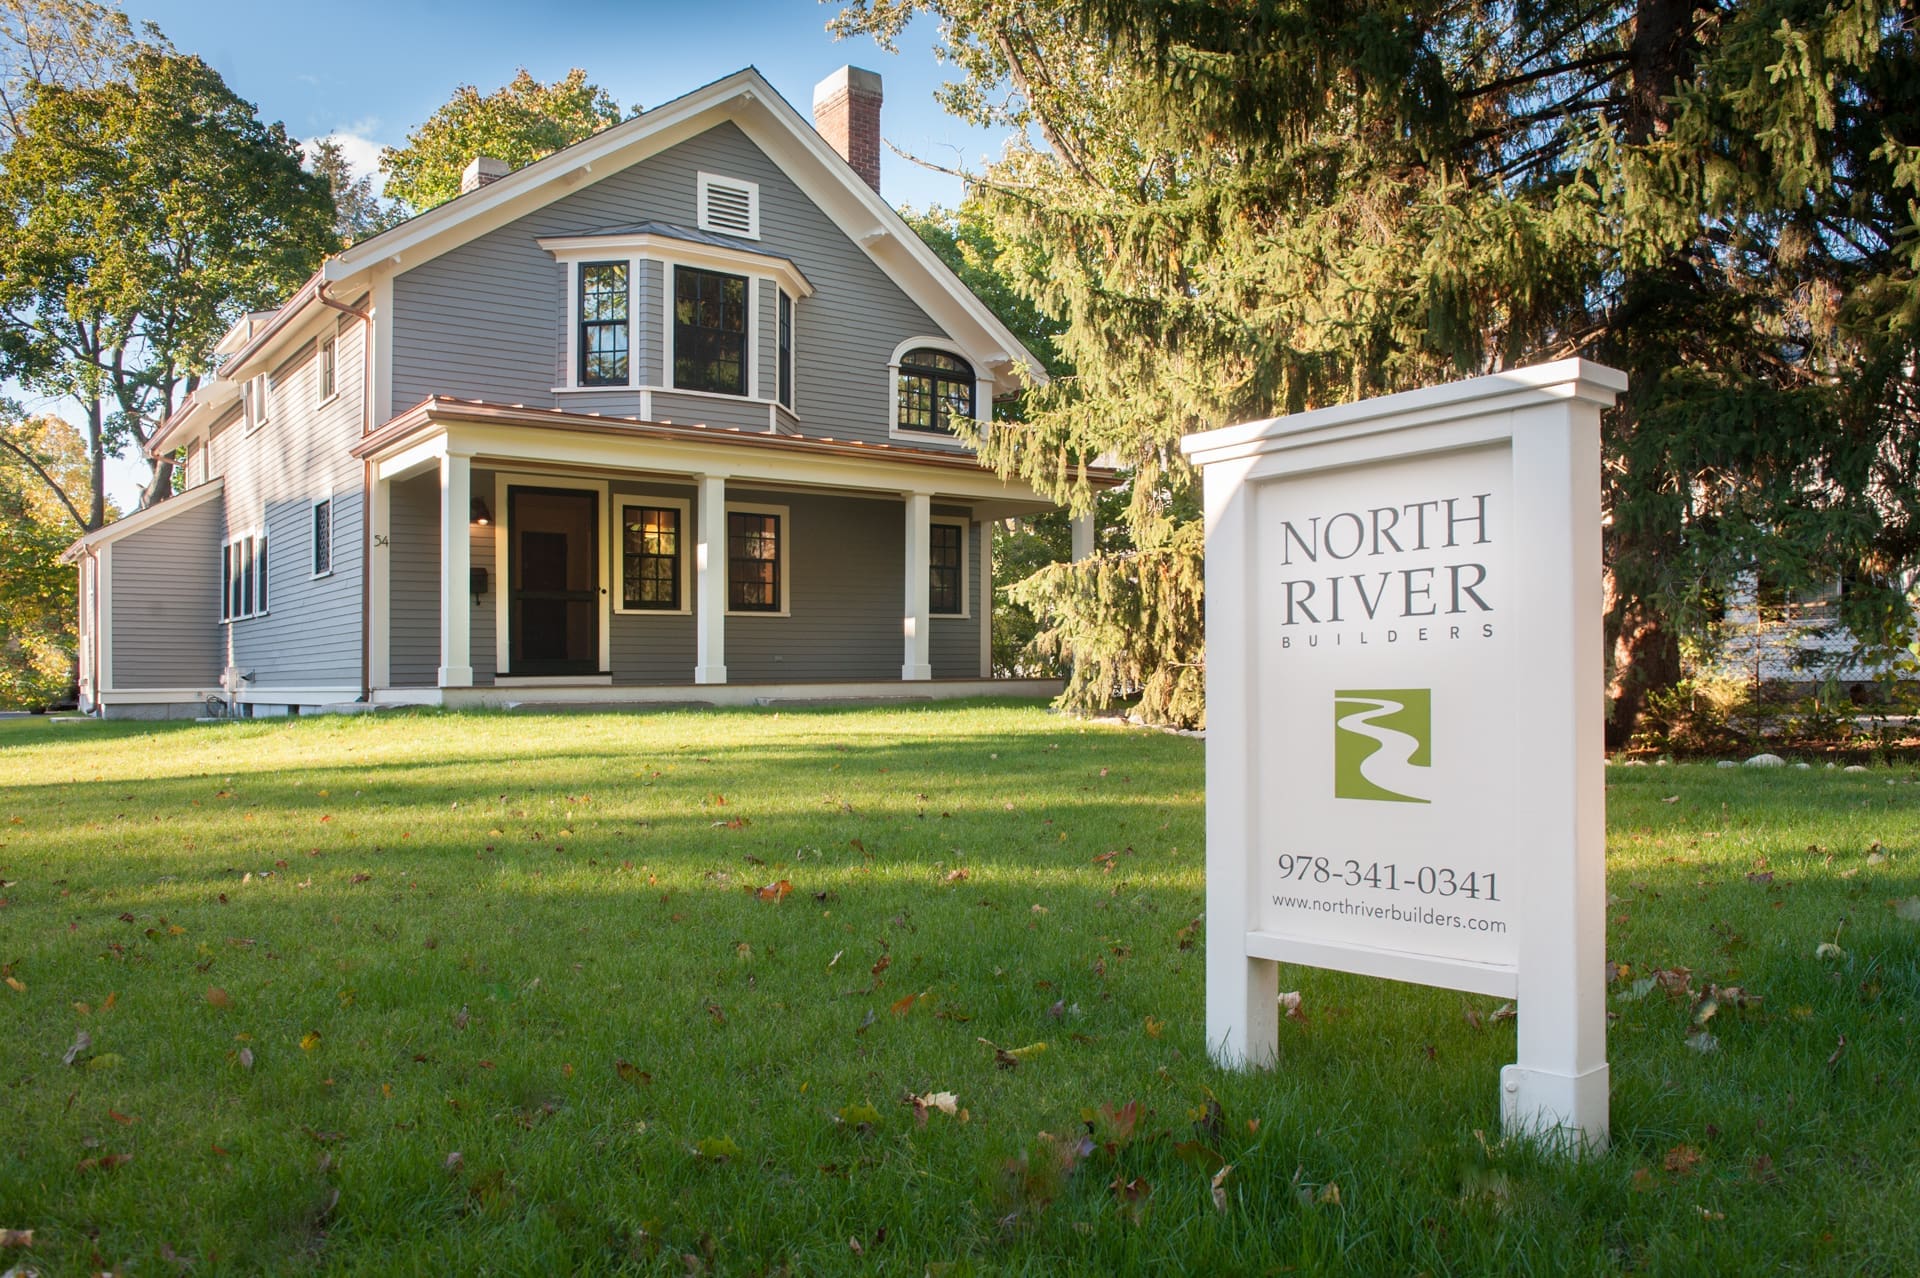 A photo of a North River Builders lawn sign in front of a grey-blue carriage house with front porch overhang, white trim, and black windows.